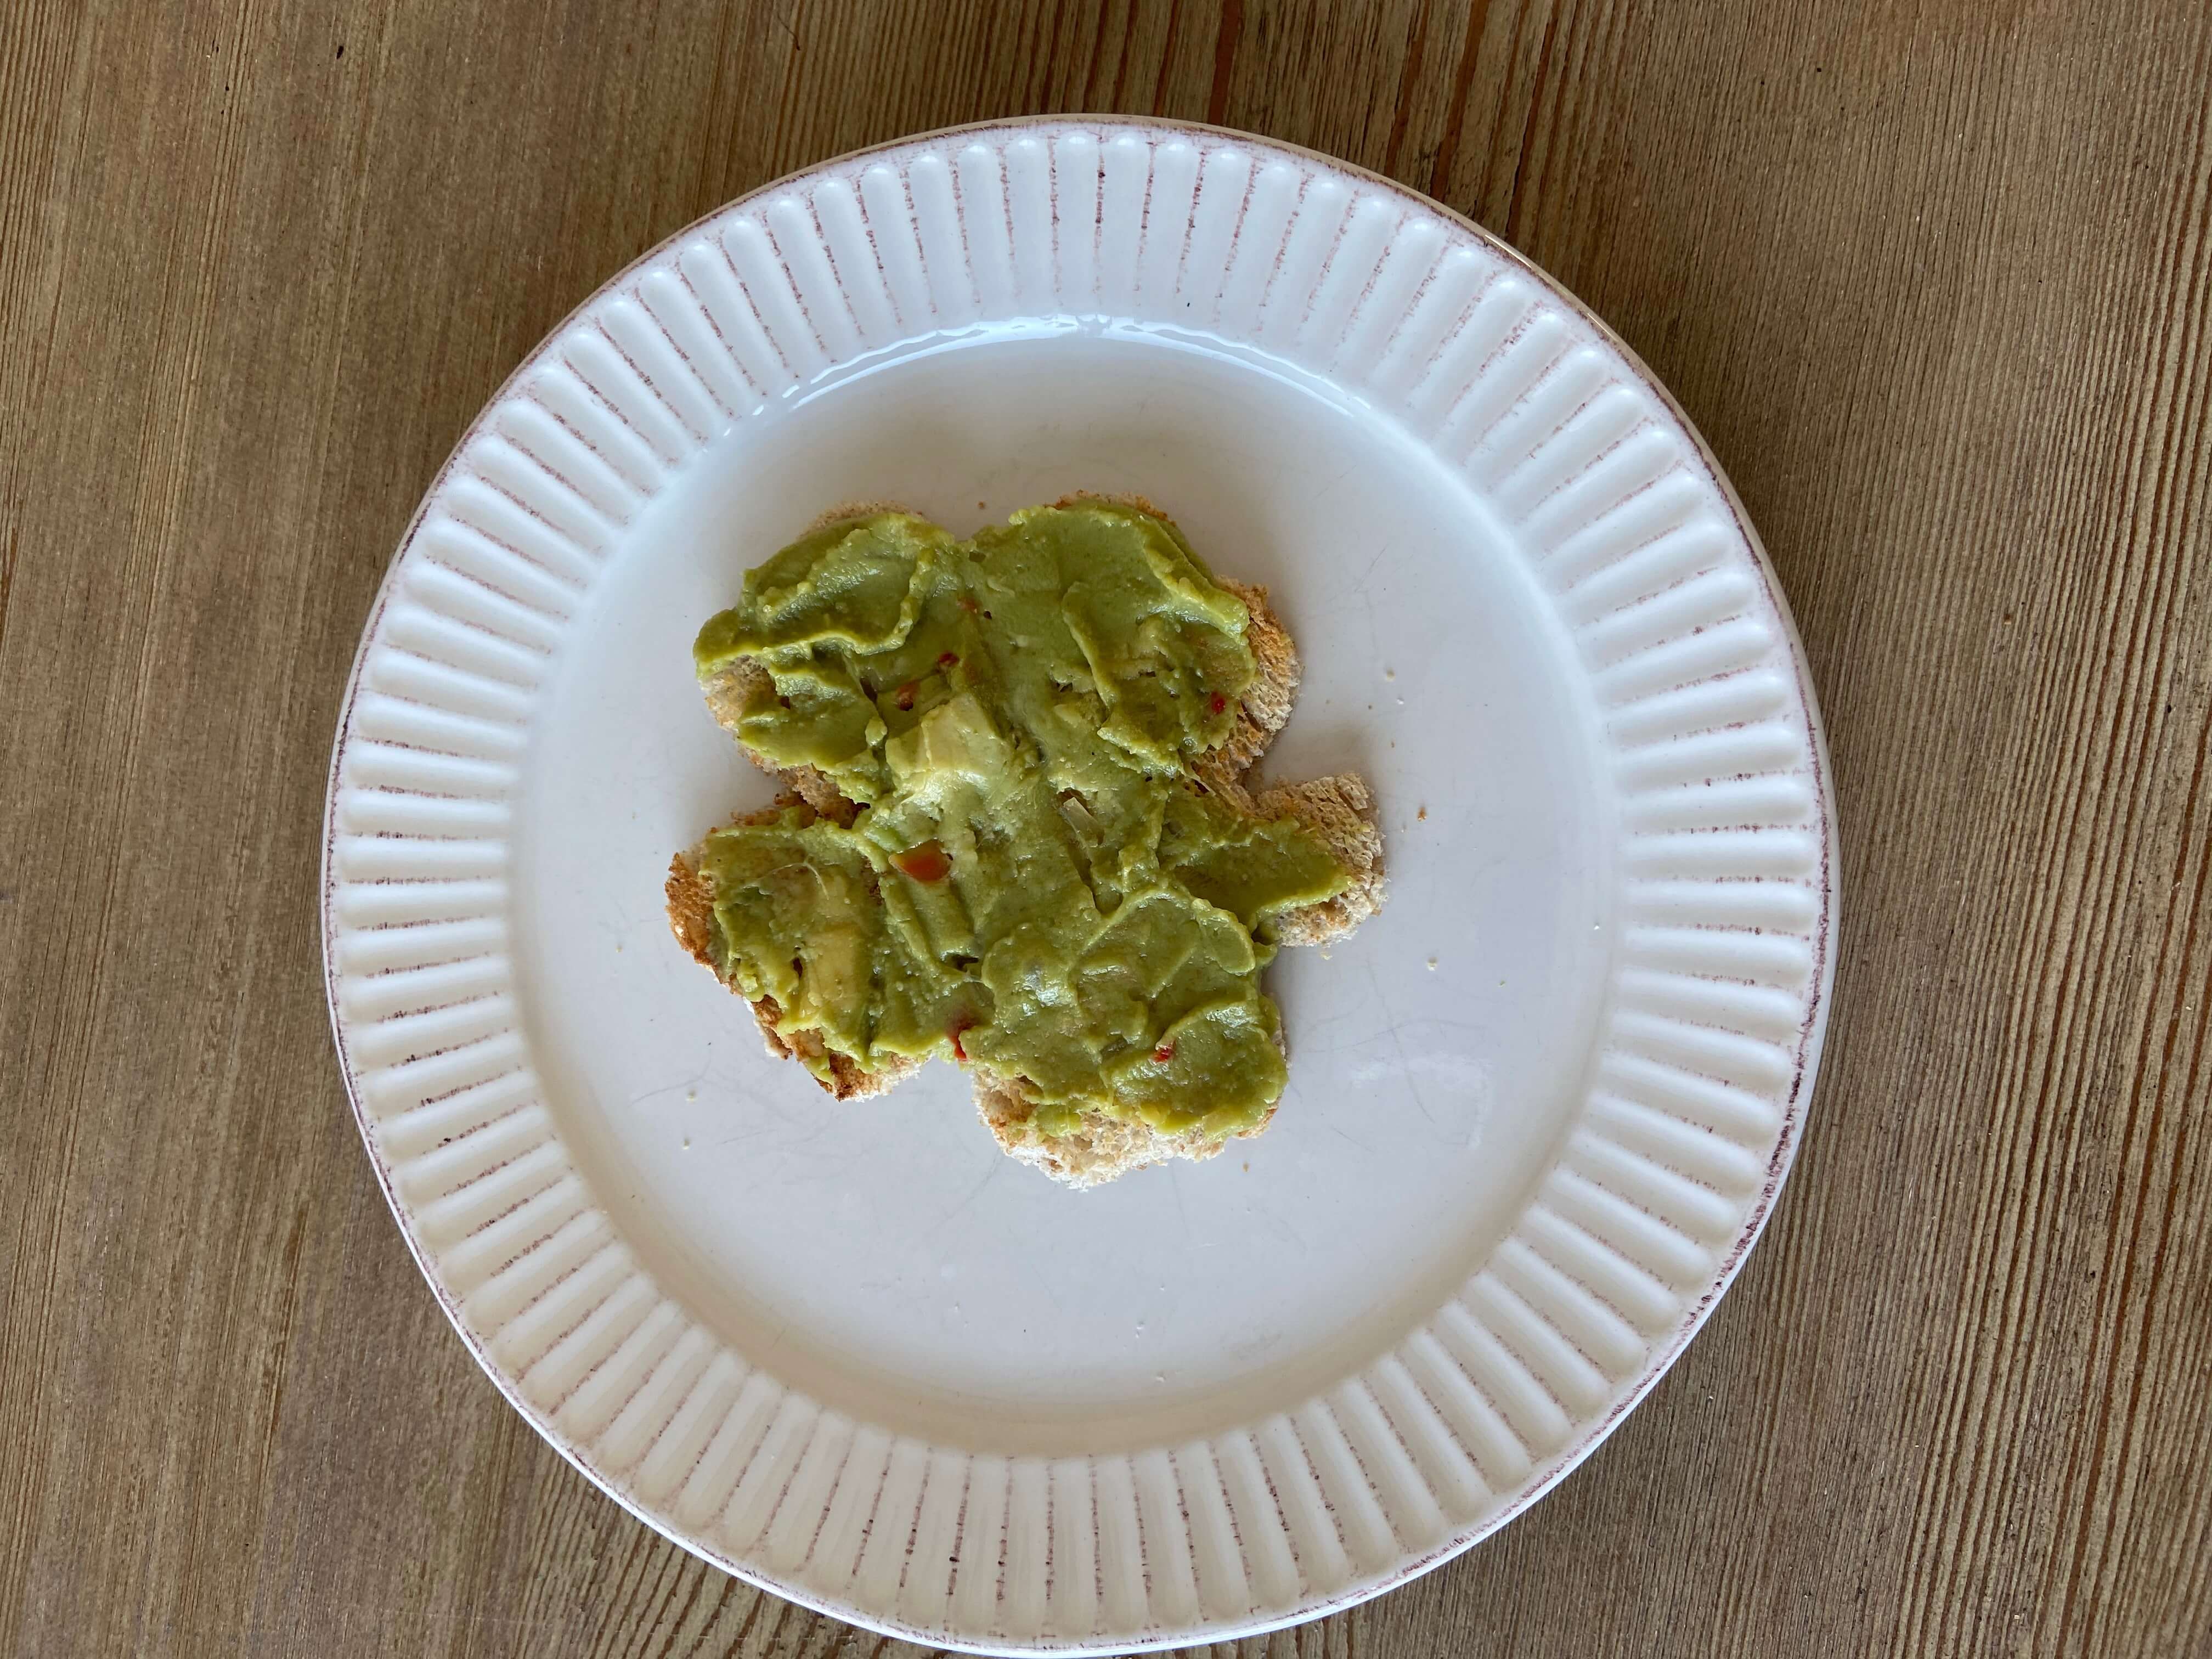 Shamrock Cutout Toast topped with Sabra Spicy Guac